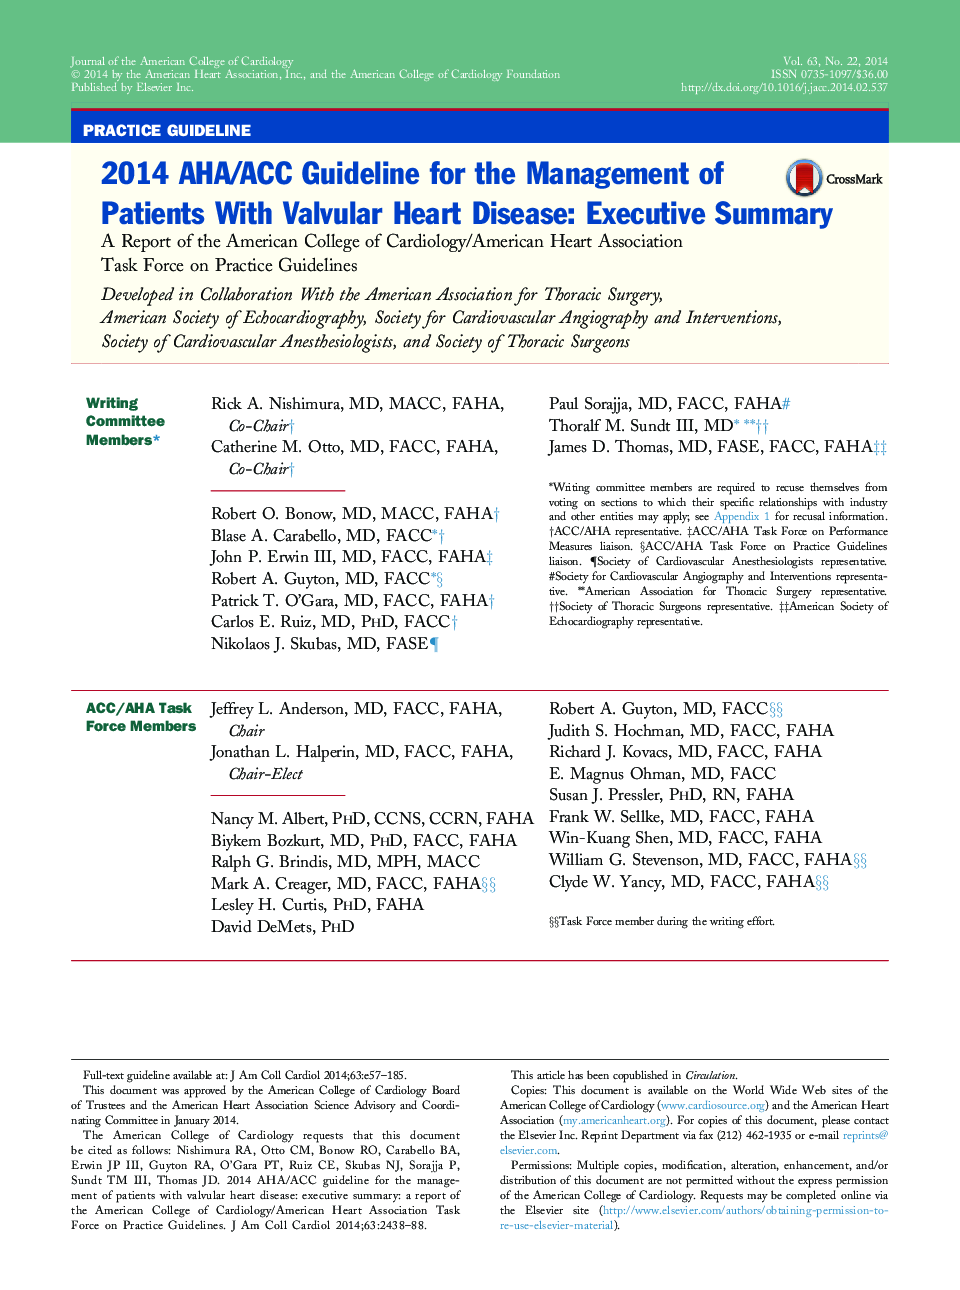 2014 AHA/ACC Guideline for the Management of Patients With Valvular Heart Disease: Executive Summary